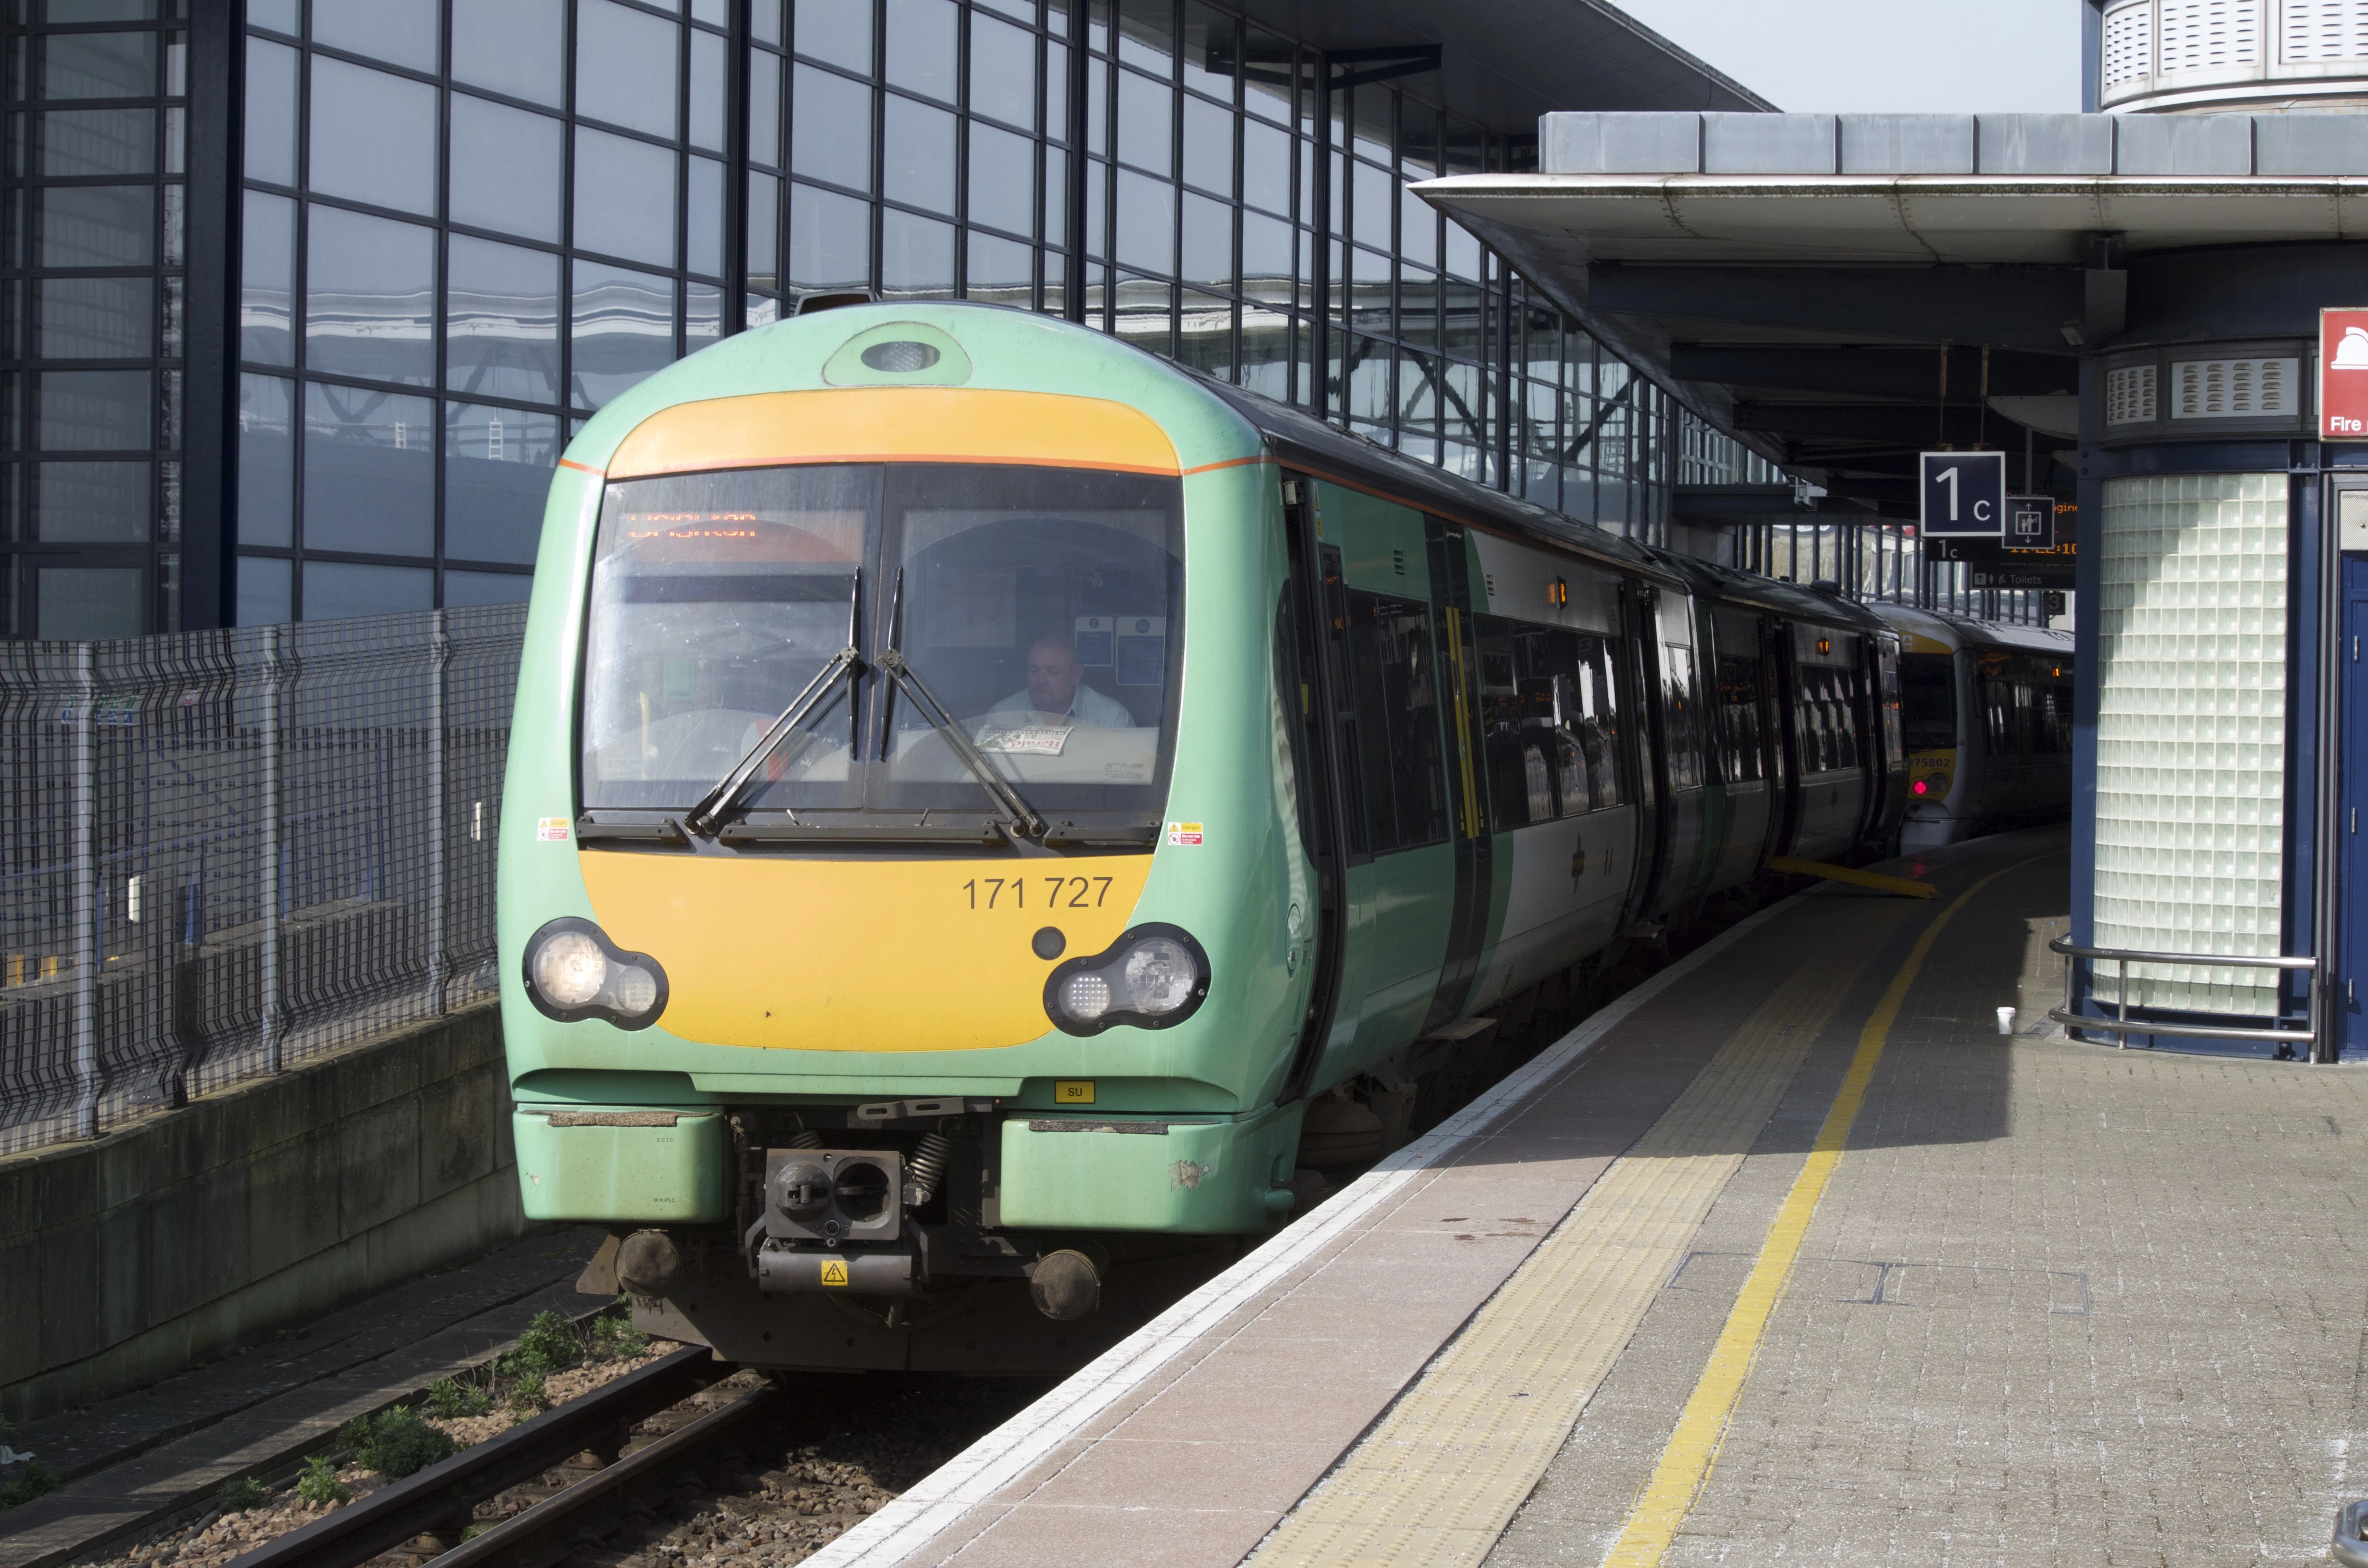 Go Ahead is to fork out over £13m for Southern Rail improvements.